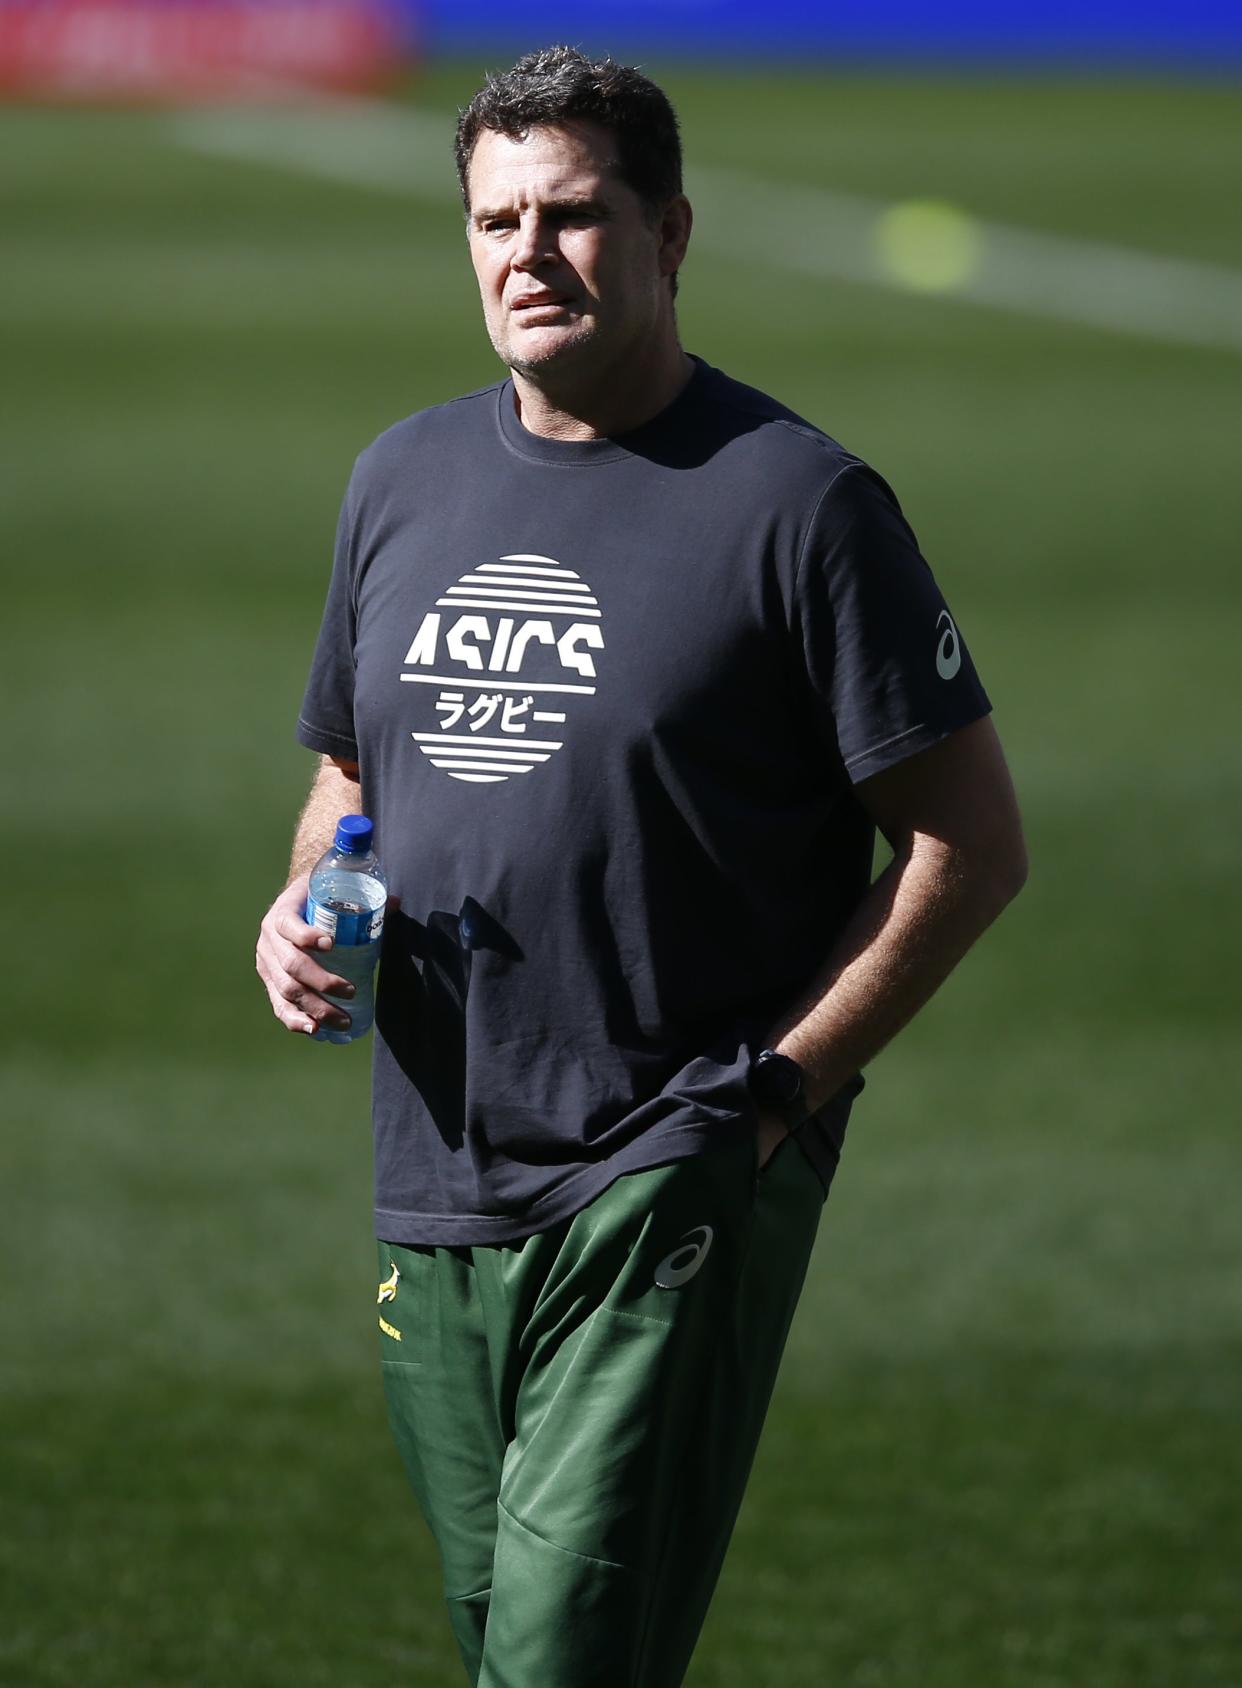 Rassie Erasmus, pictured, has been criticised for his “unacceptable” online rant against referee Nic Berry (Steve Haag/PA) (PA Wire)